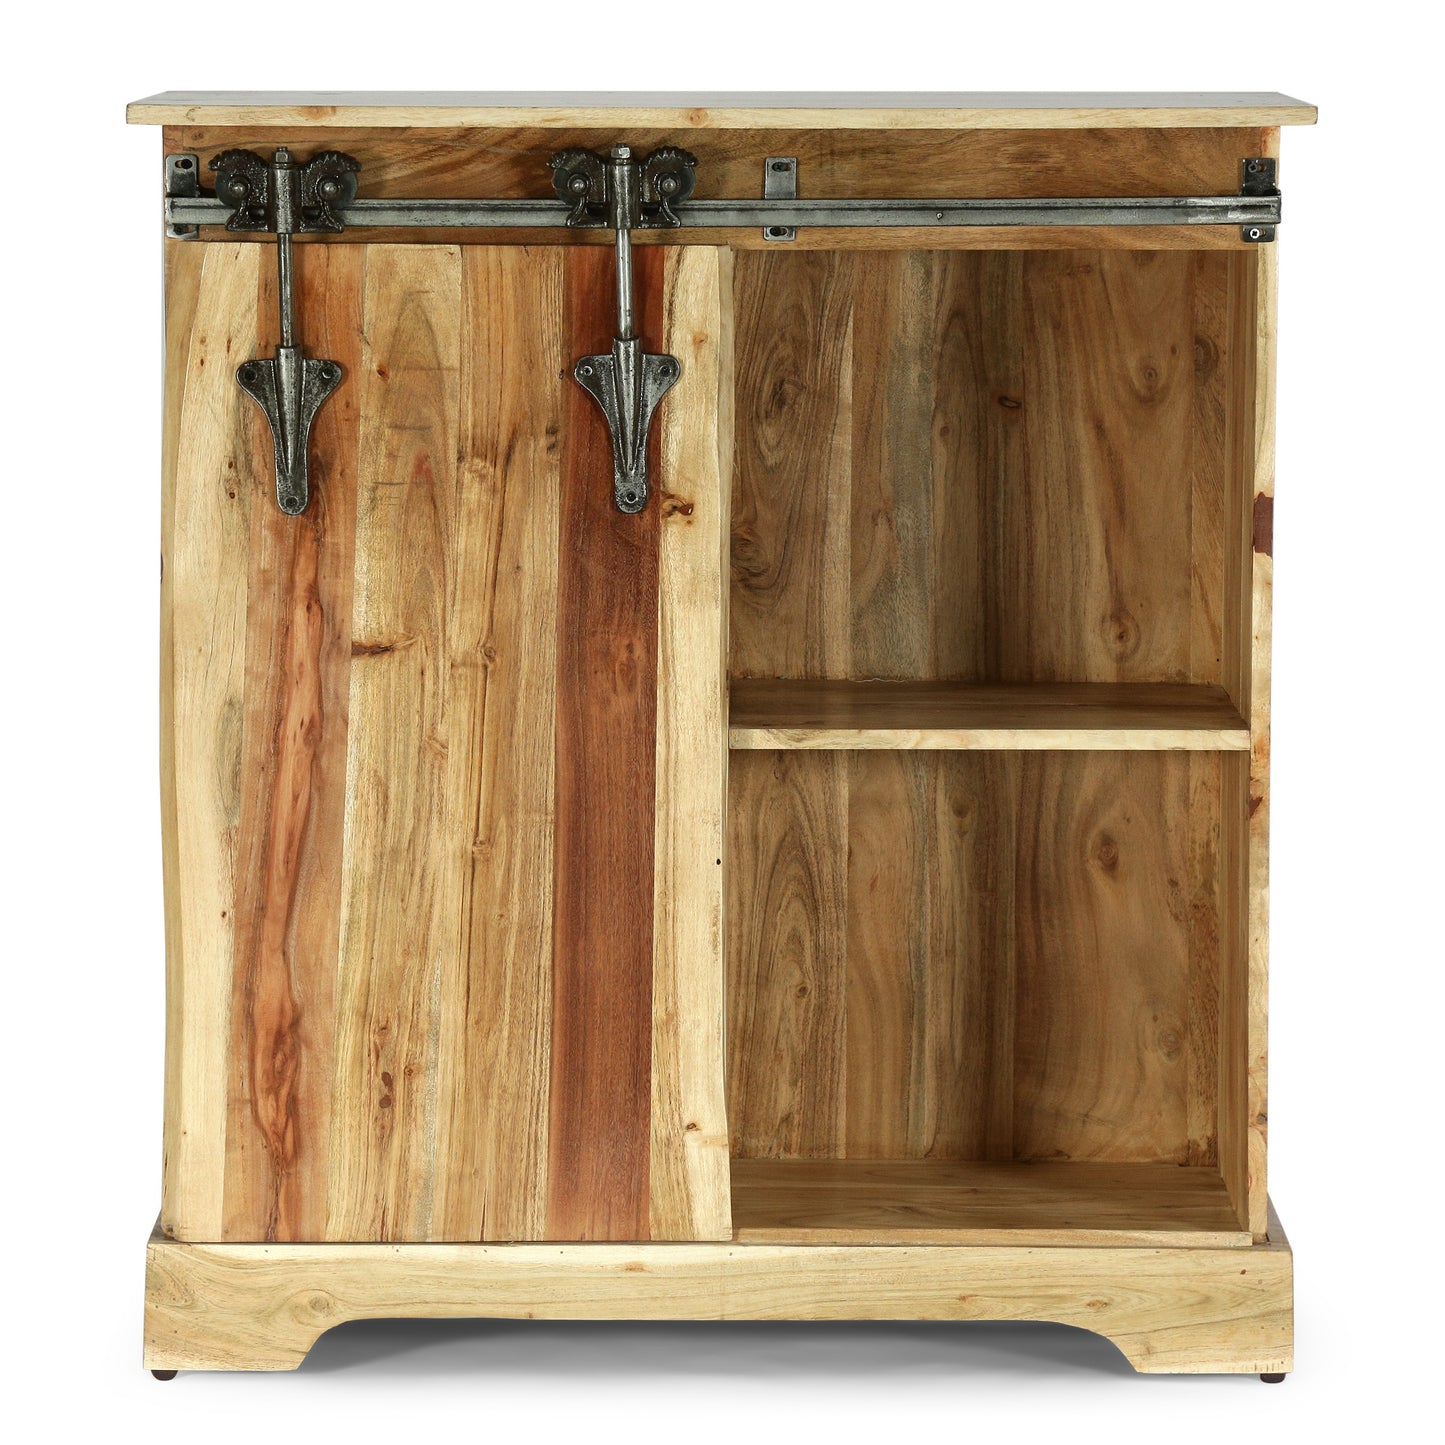 Veatch Modern Industrial Handcrafted Acacia Wood Live Edge Cabinet with Sliding Door, Natural and Black